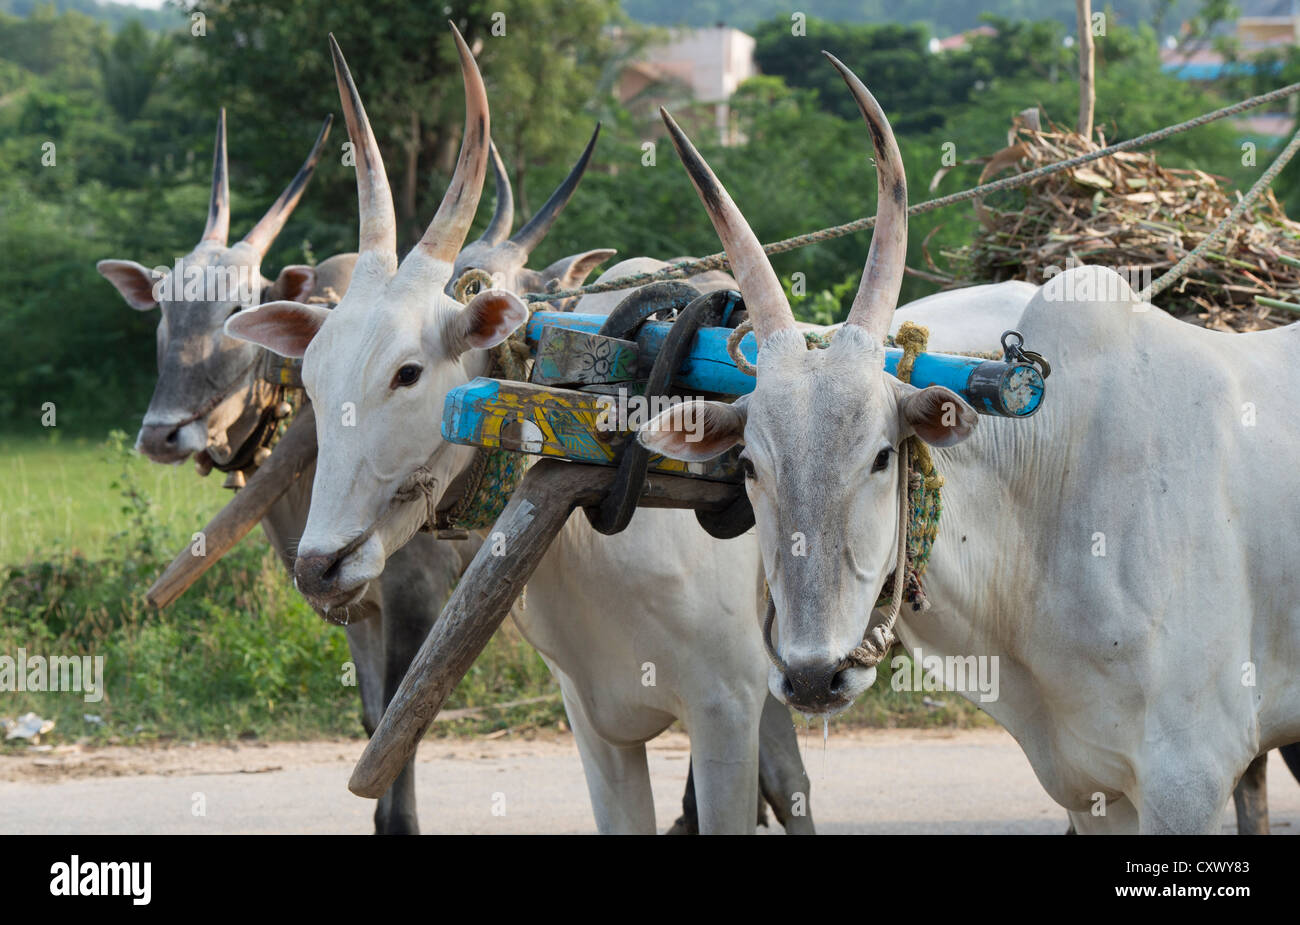 Zebu cattle pulling two Indian bullock carts in the rural indian countryside. Andhra Pradesh, India Stock Photo